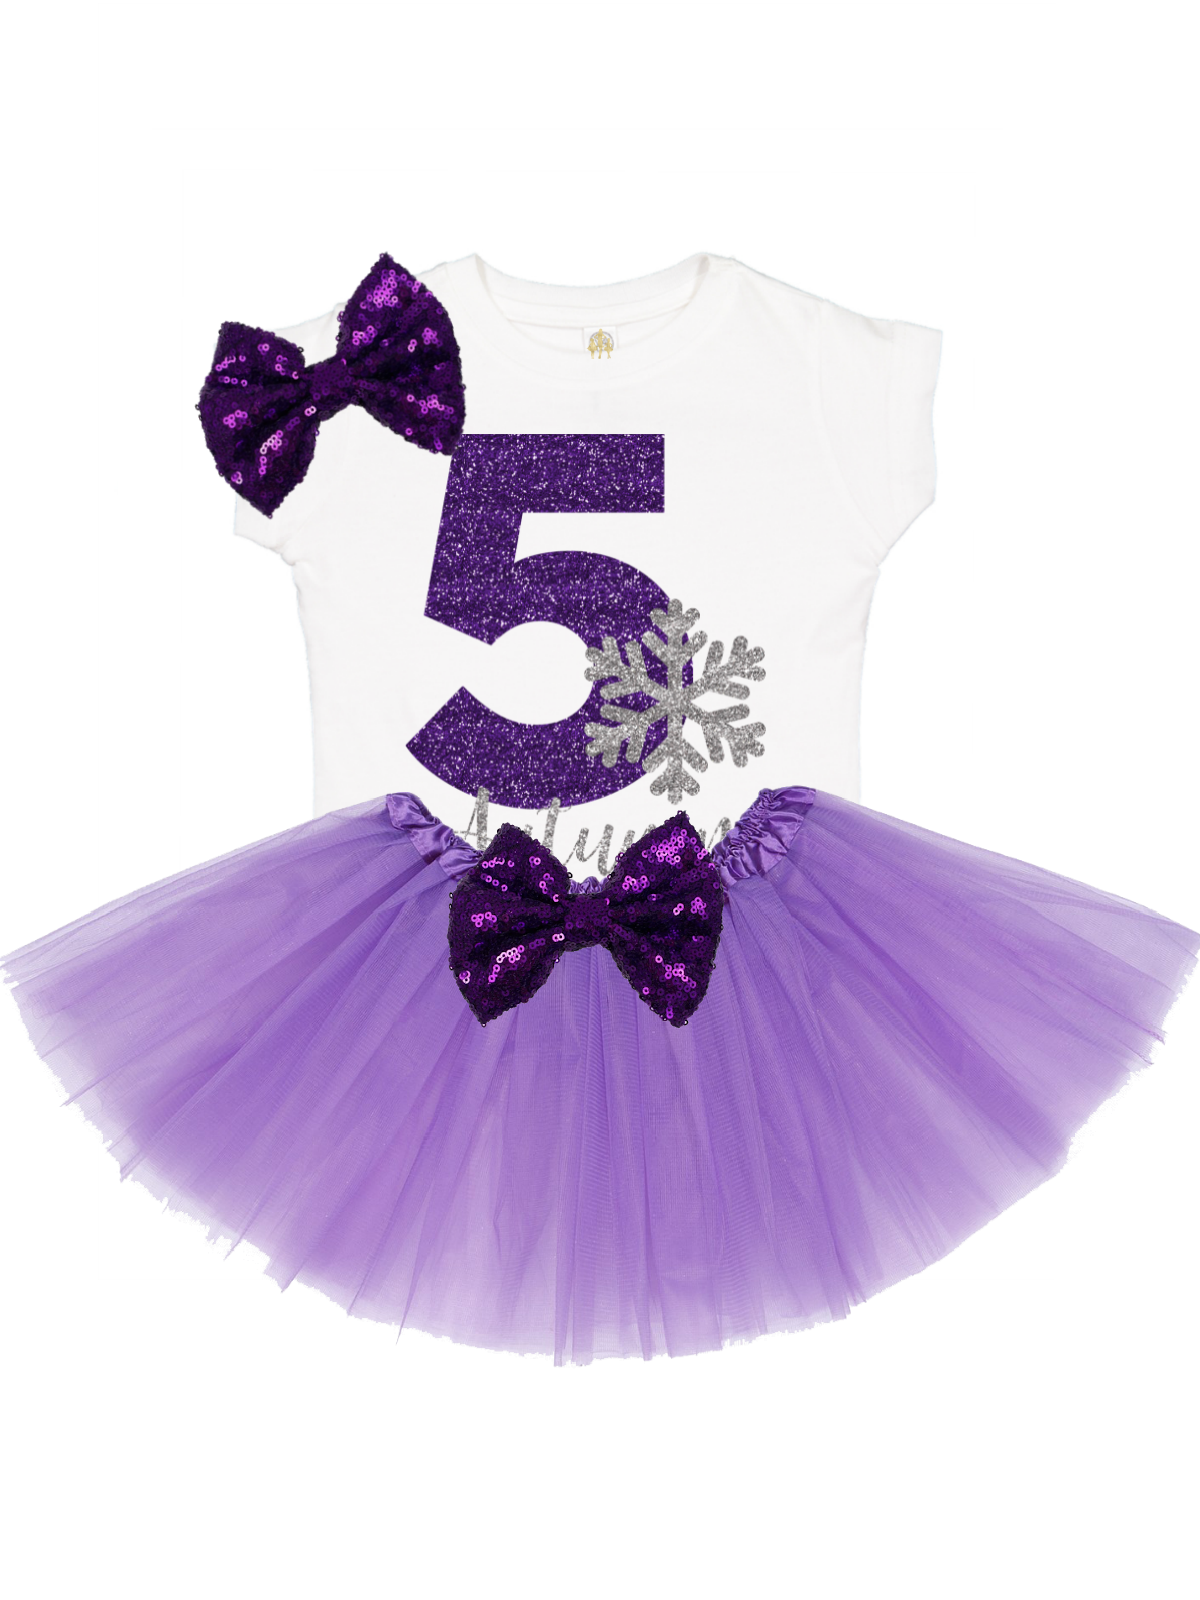 girls purple and silver snowflake tutu outfit